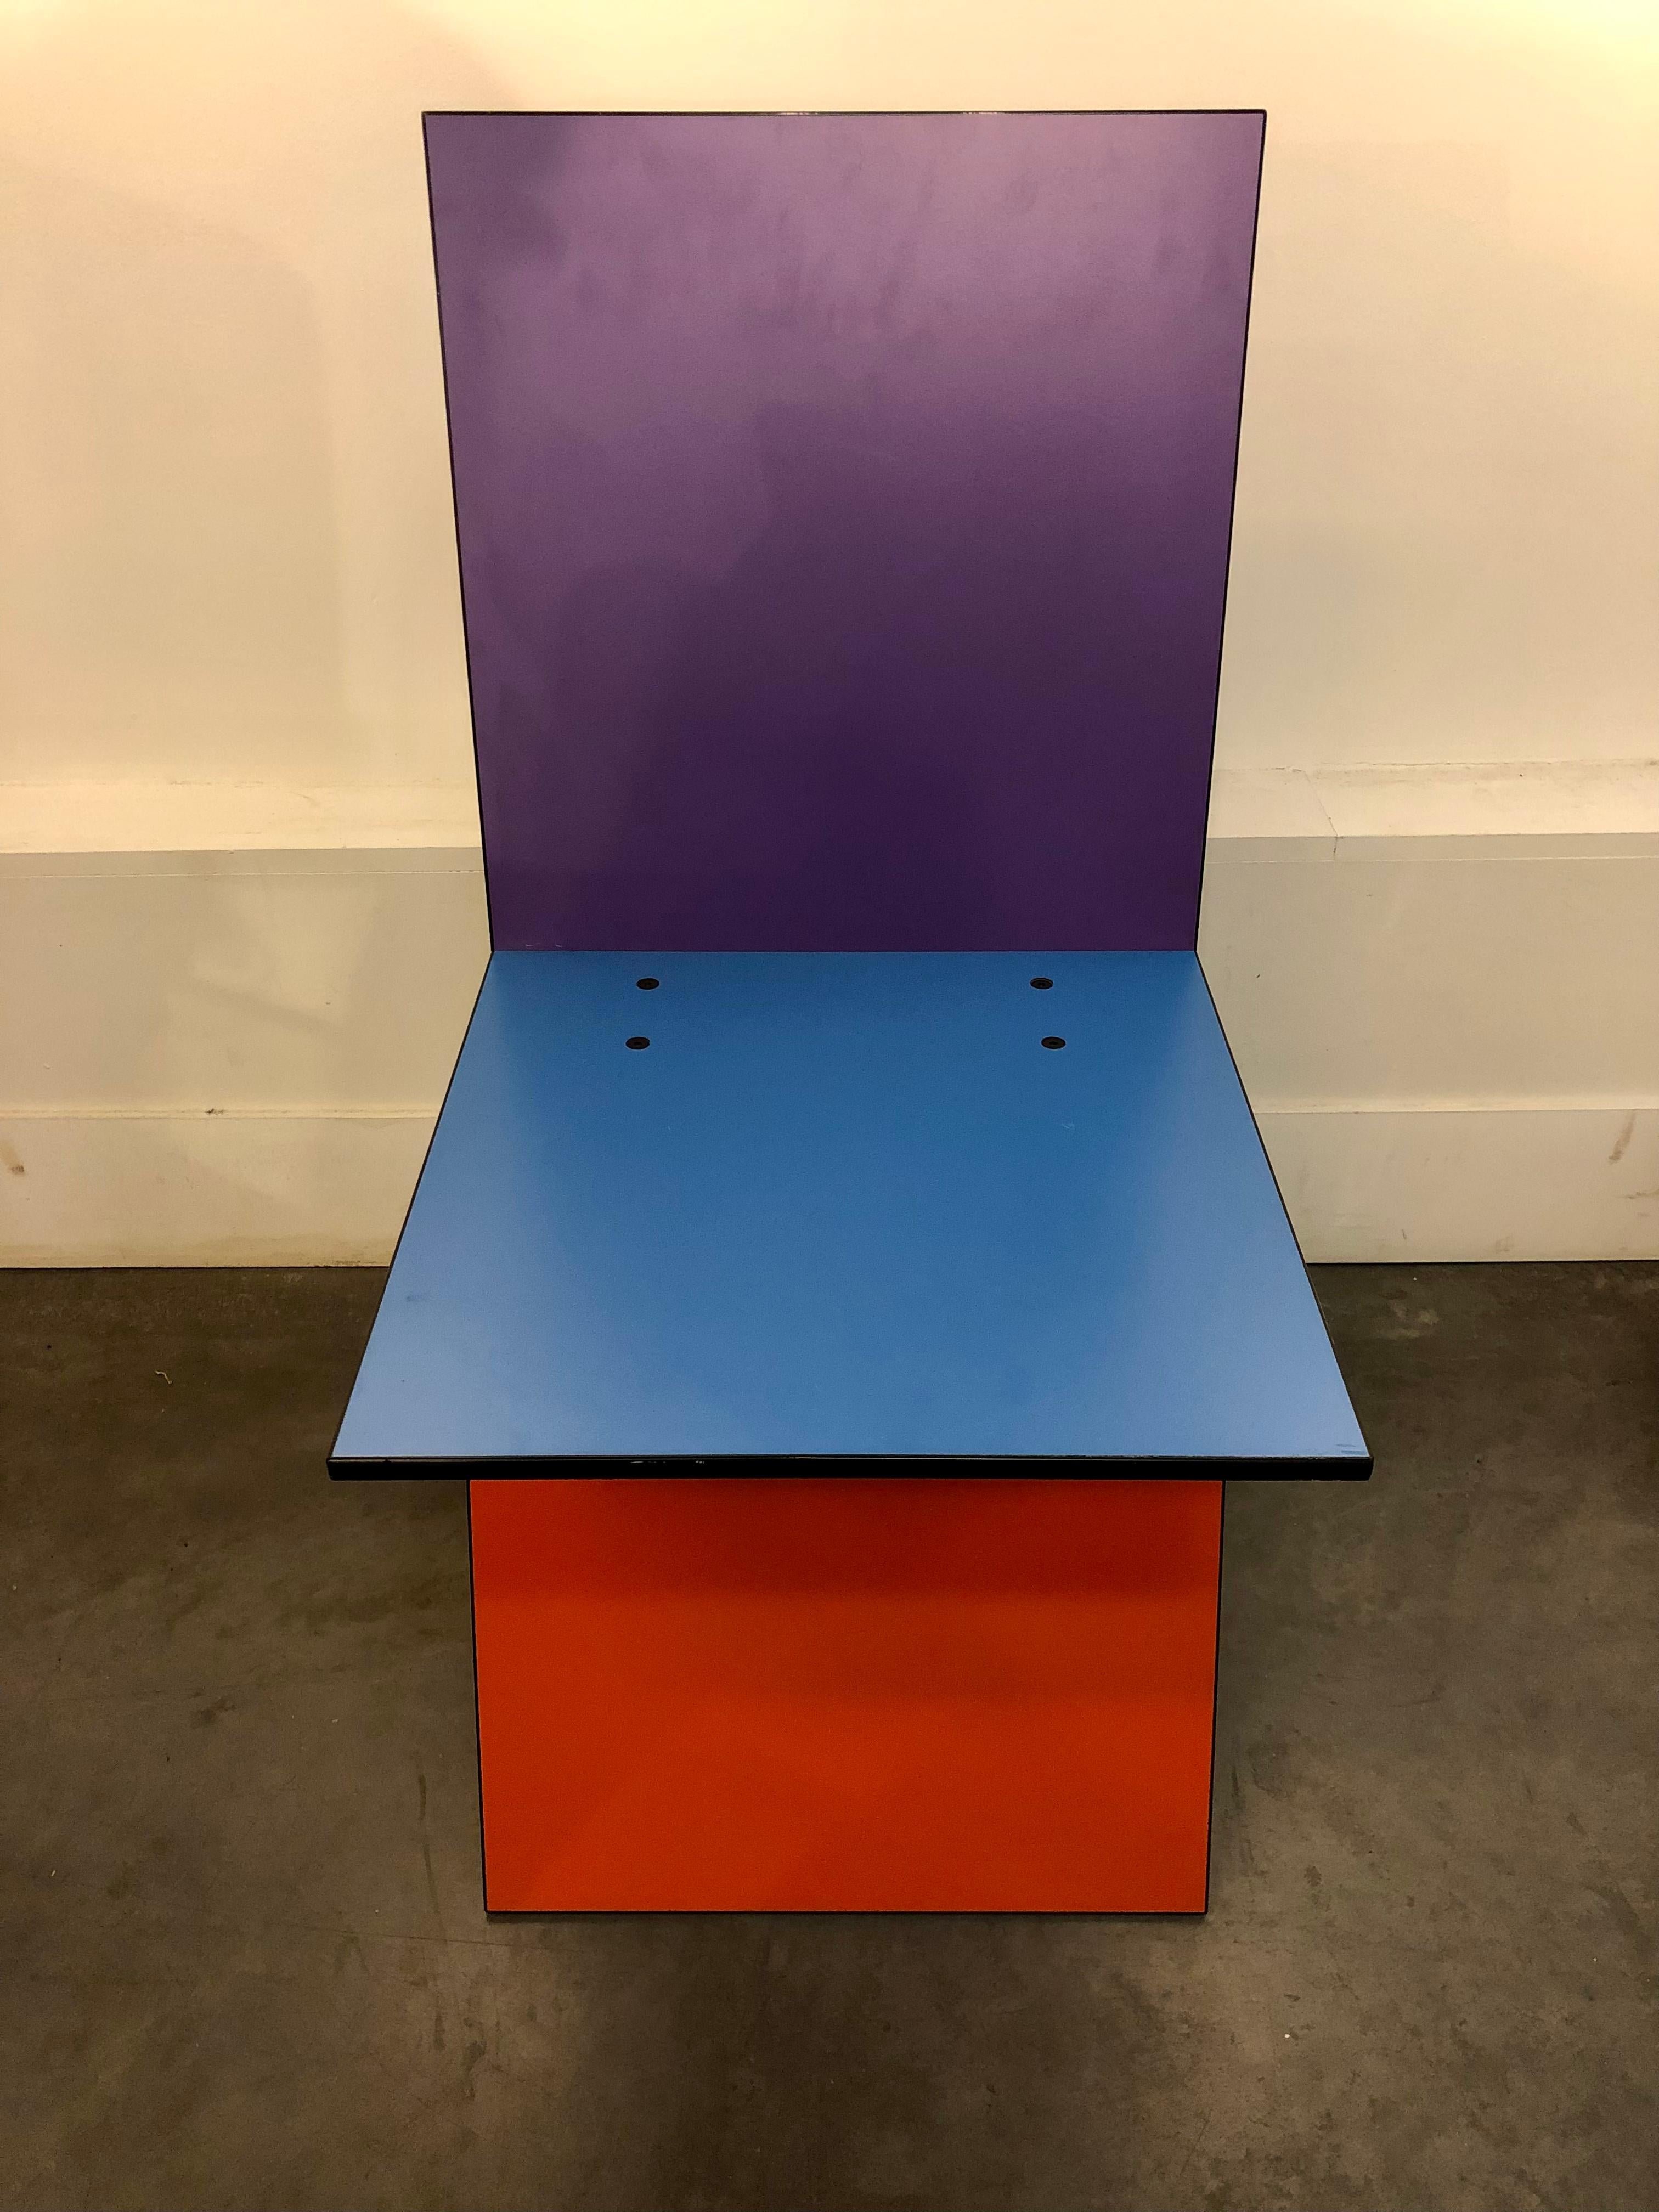 Vilbert chair by Verner Panton for IKEA in 1993.
This chair was produced in limited quantities:4000 pieces.
The chair has its original sticker and also the original price.
Amongst the rarest things produced by IKEA.